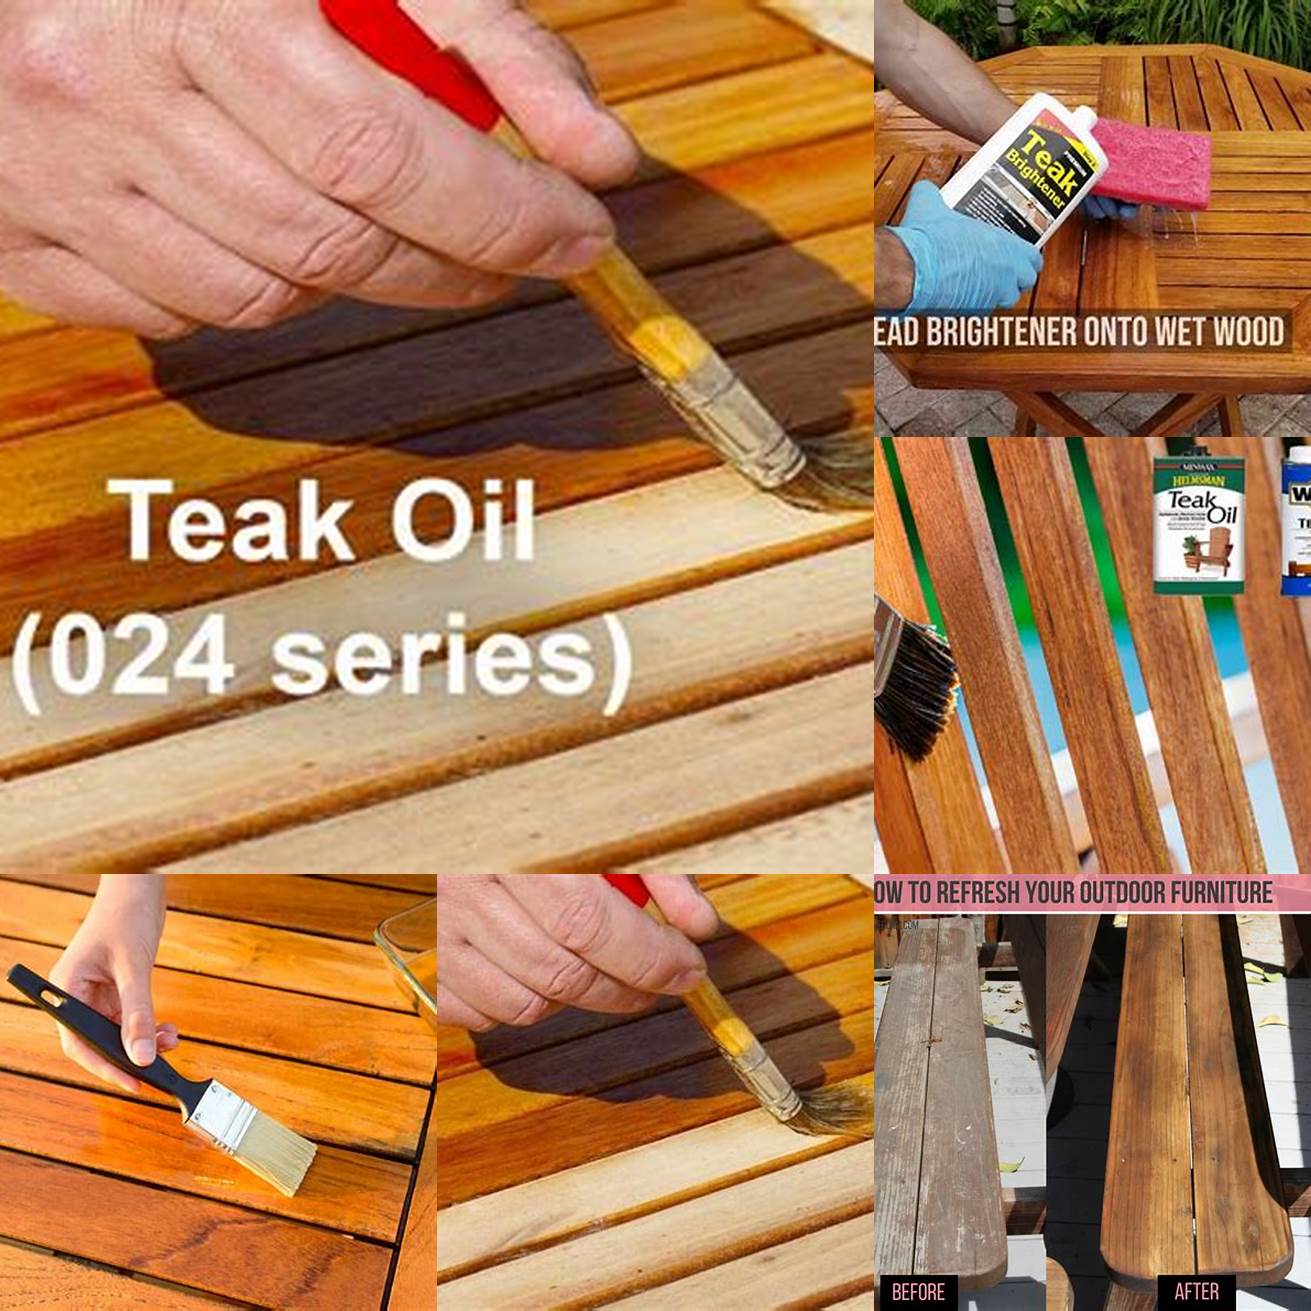 Photos of the tools needed to apply teak oil